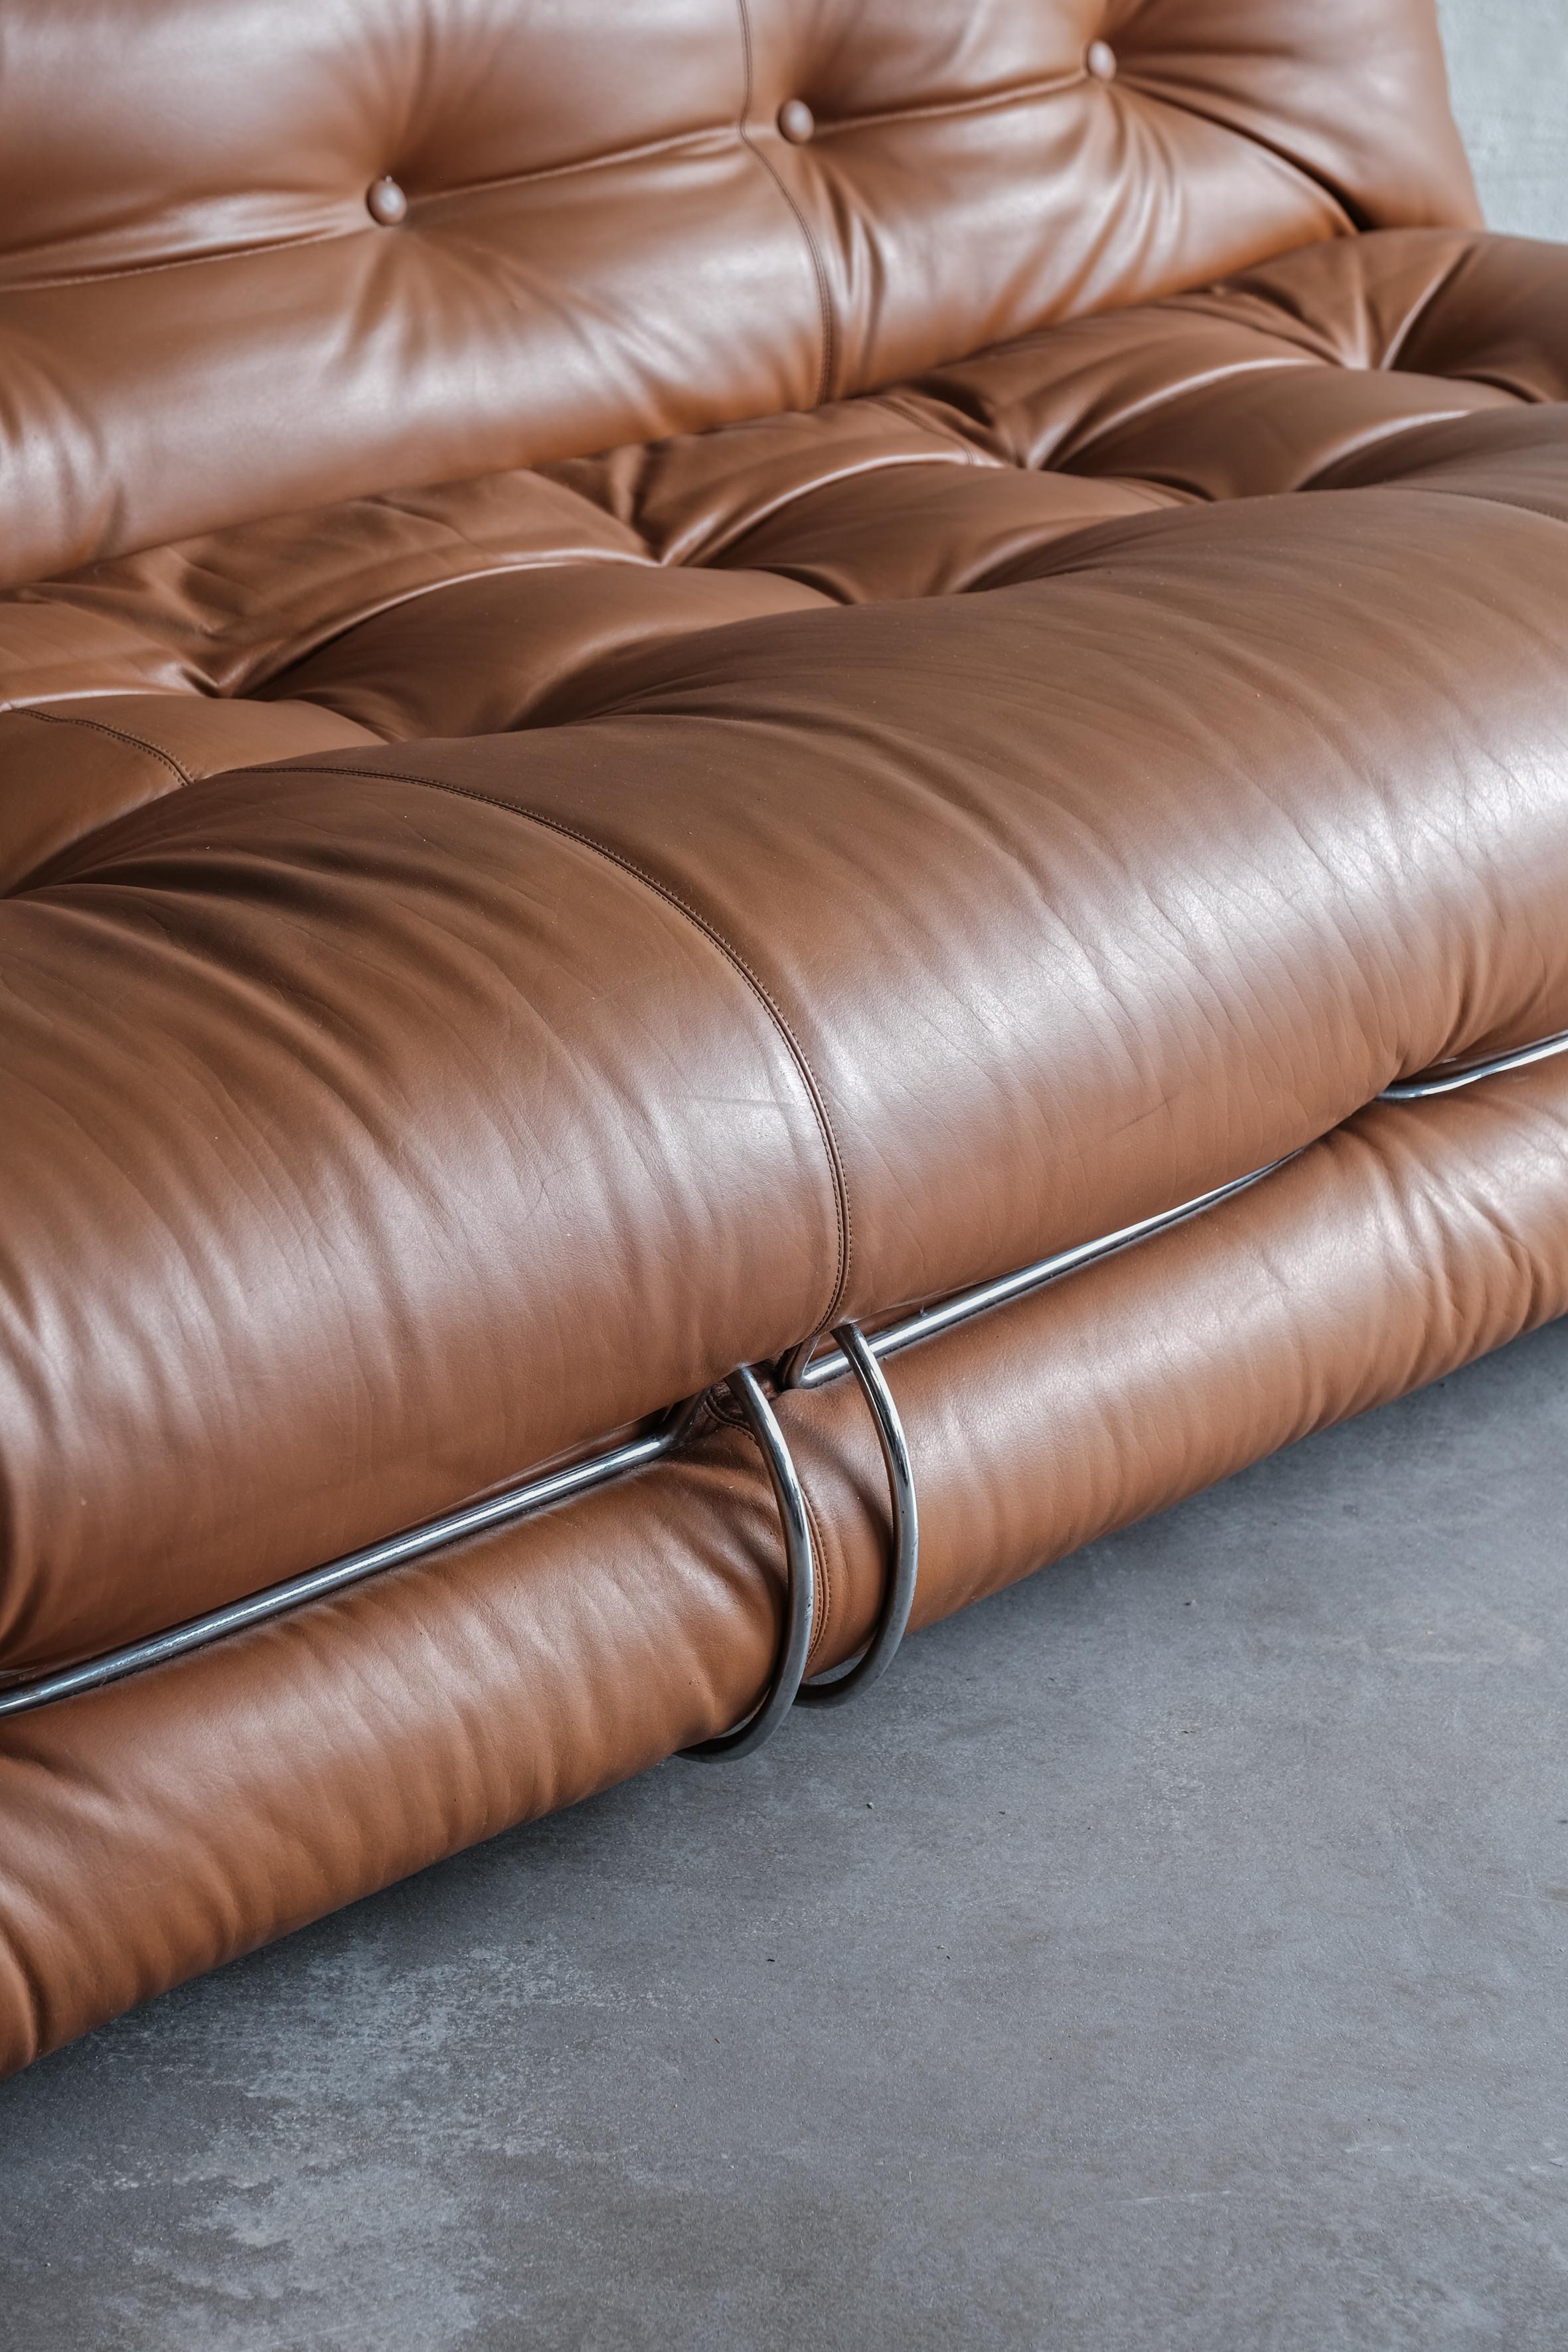 Italian Soriana 4 seater in Cognac leather designed by Afra&Tobia Scarpa or Cassina 70'